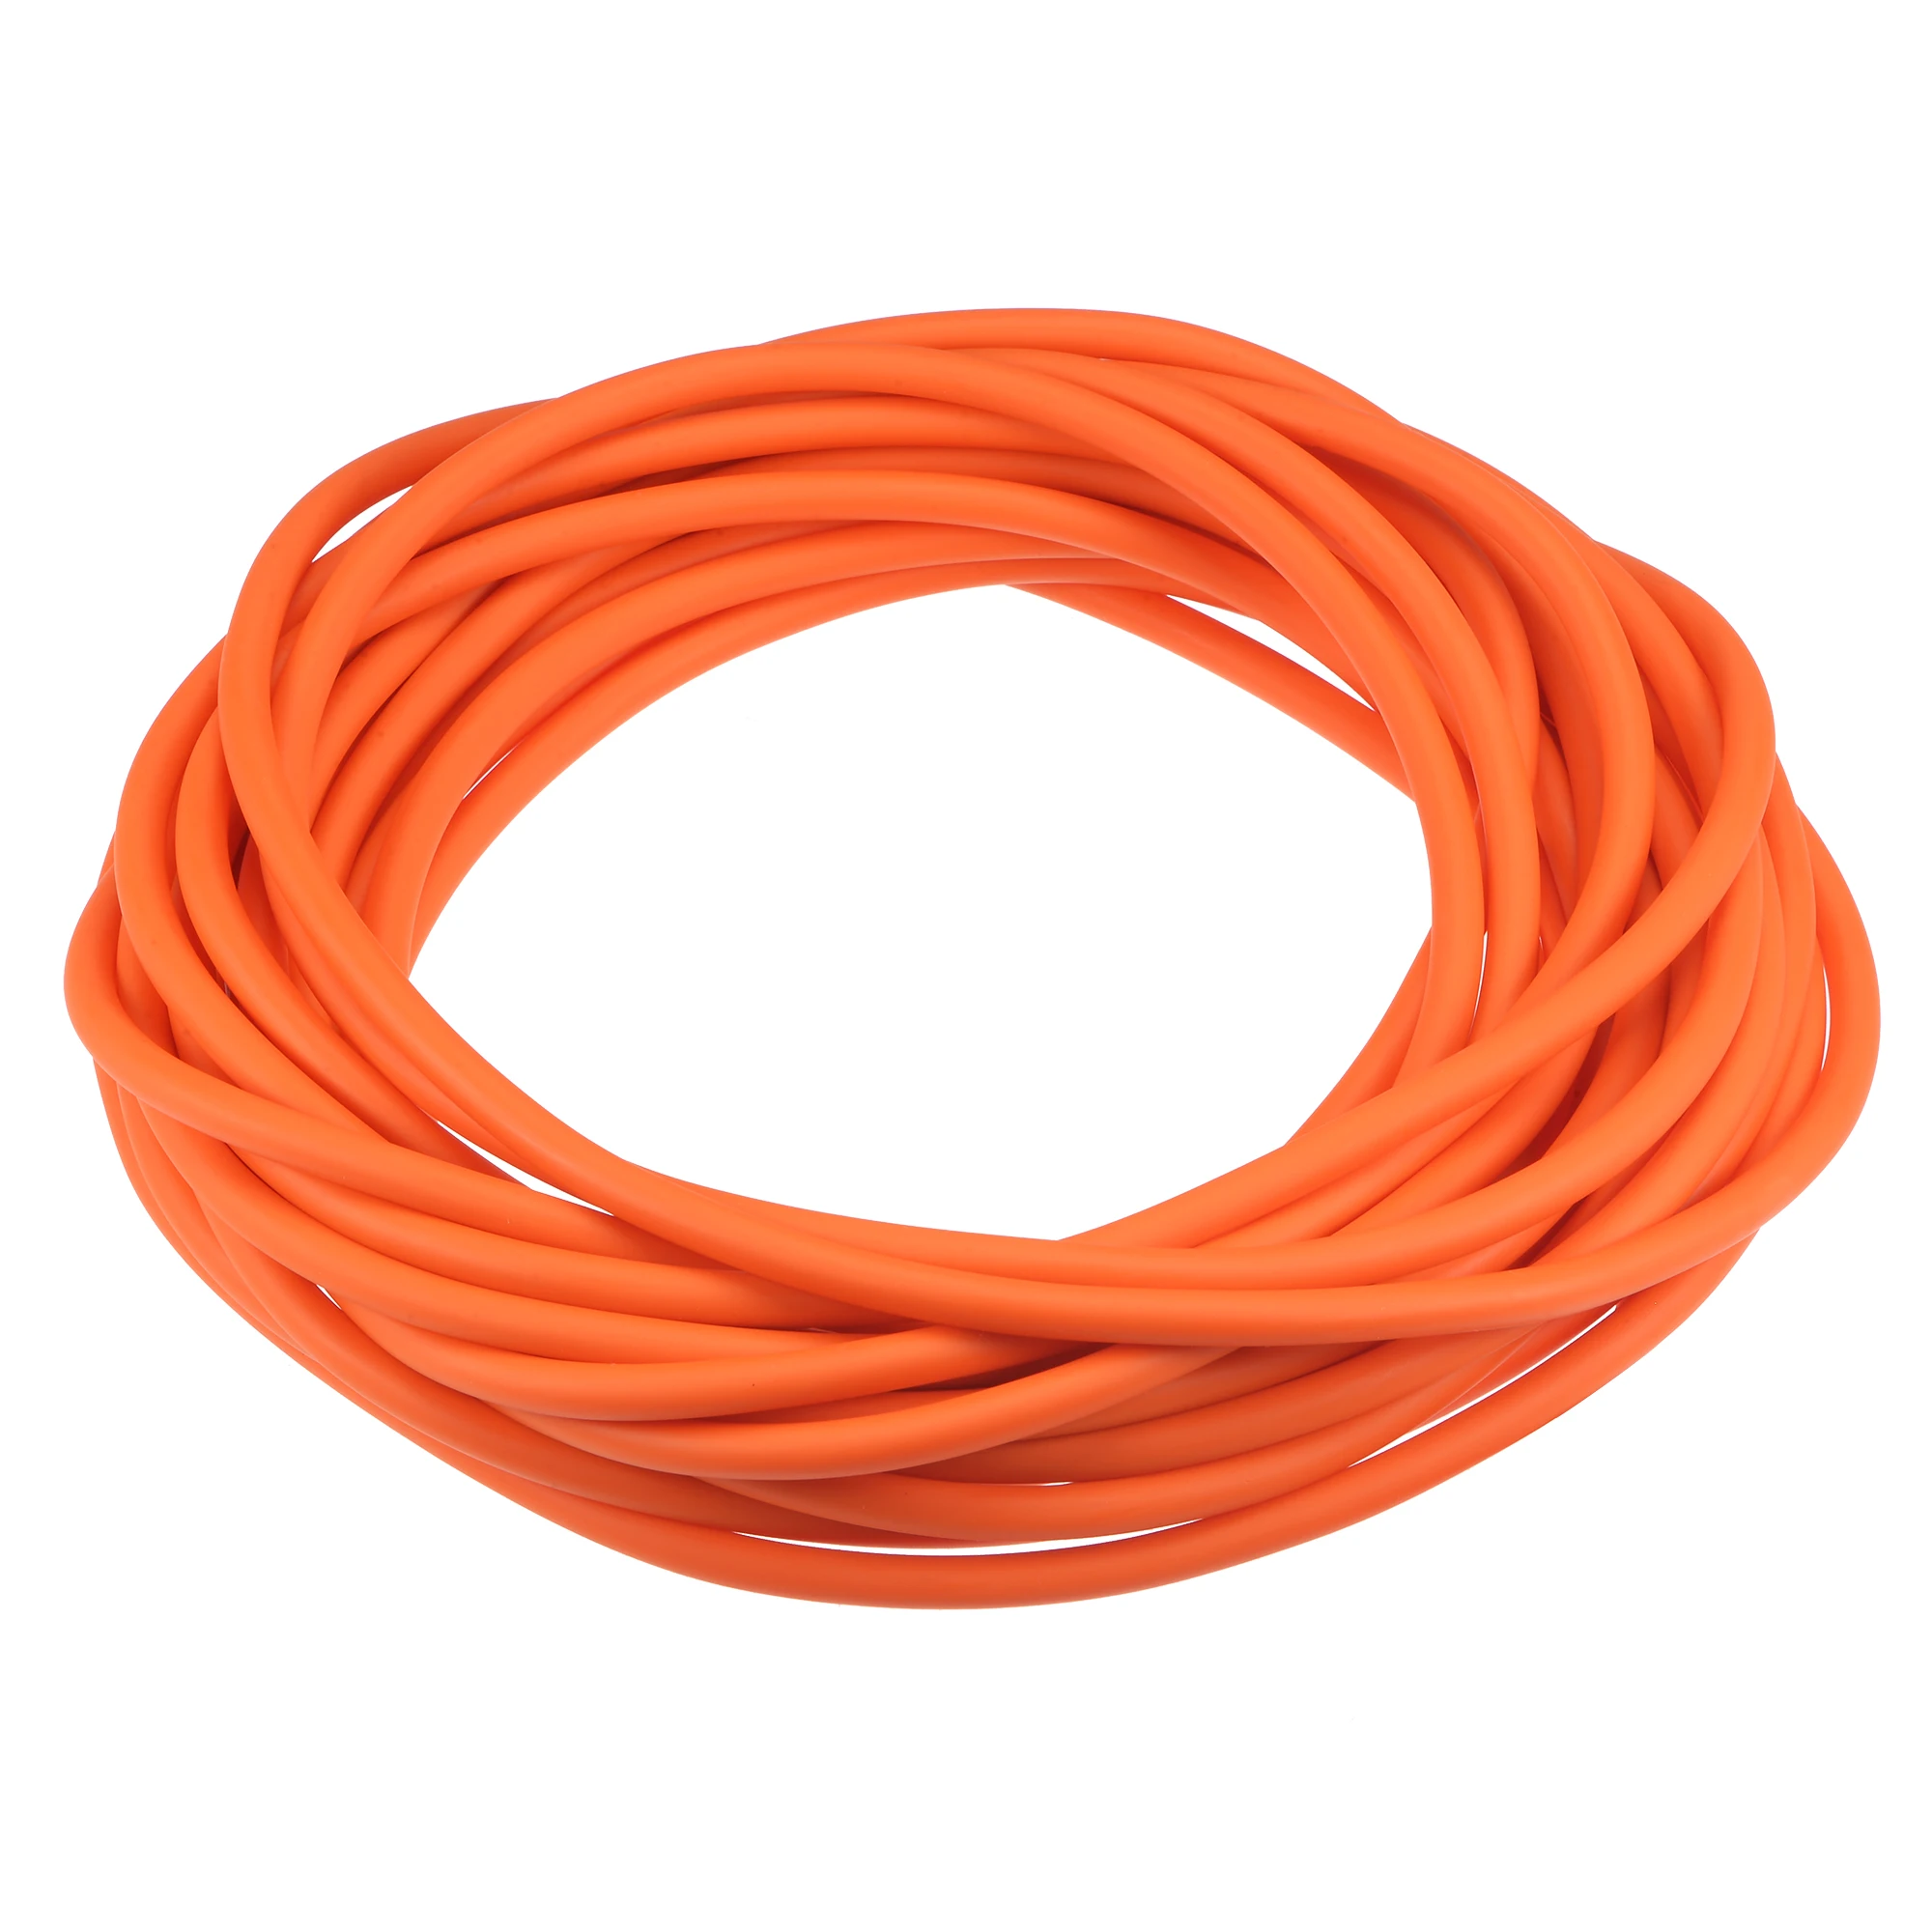 

Uxcell Latex Tubing 1/8-inch ID 1/4-inch OD 33ft Elastic Rubber Hose Orange